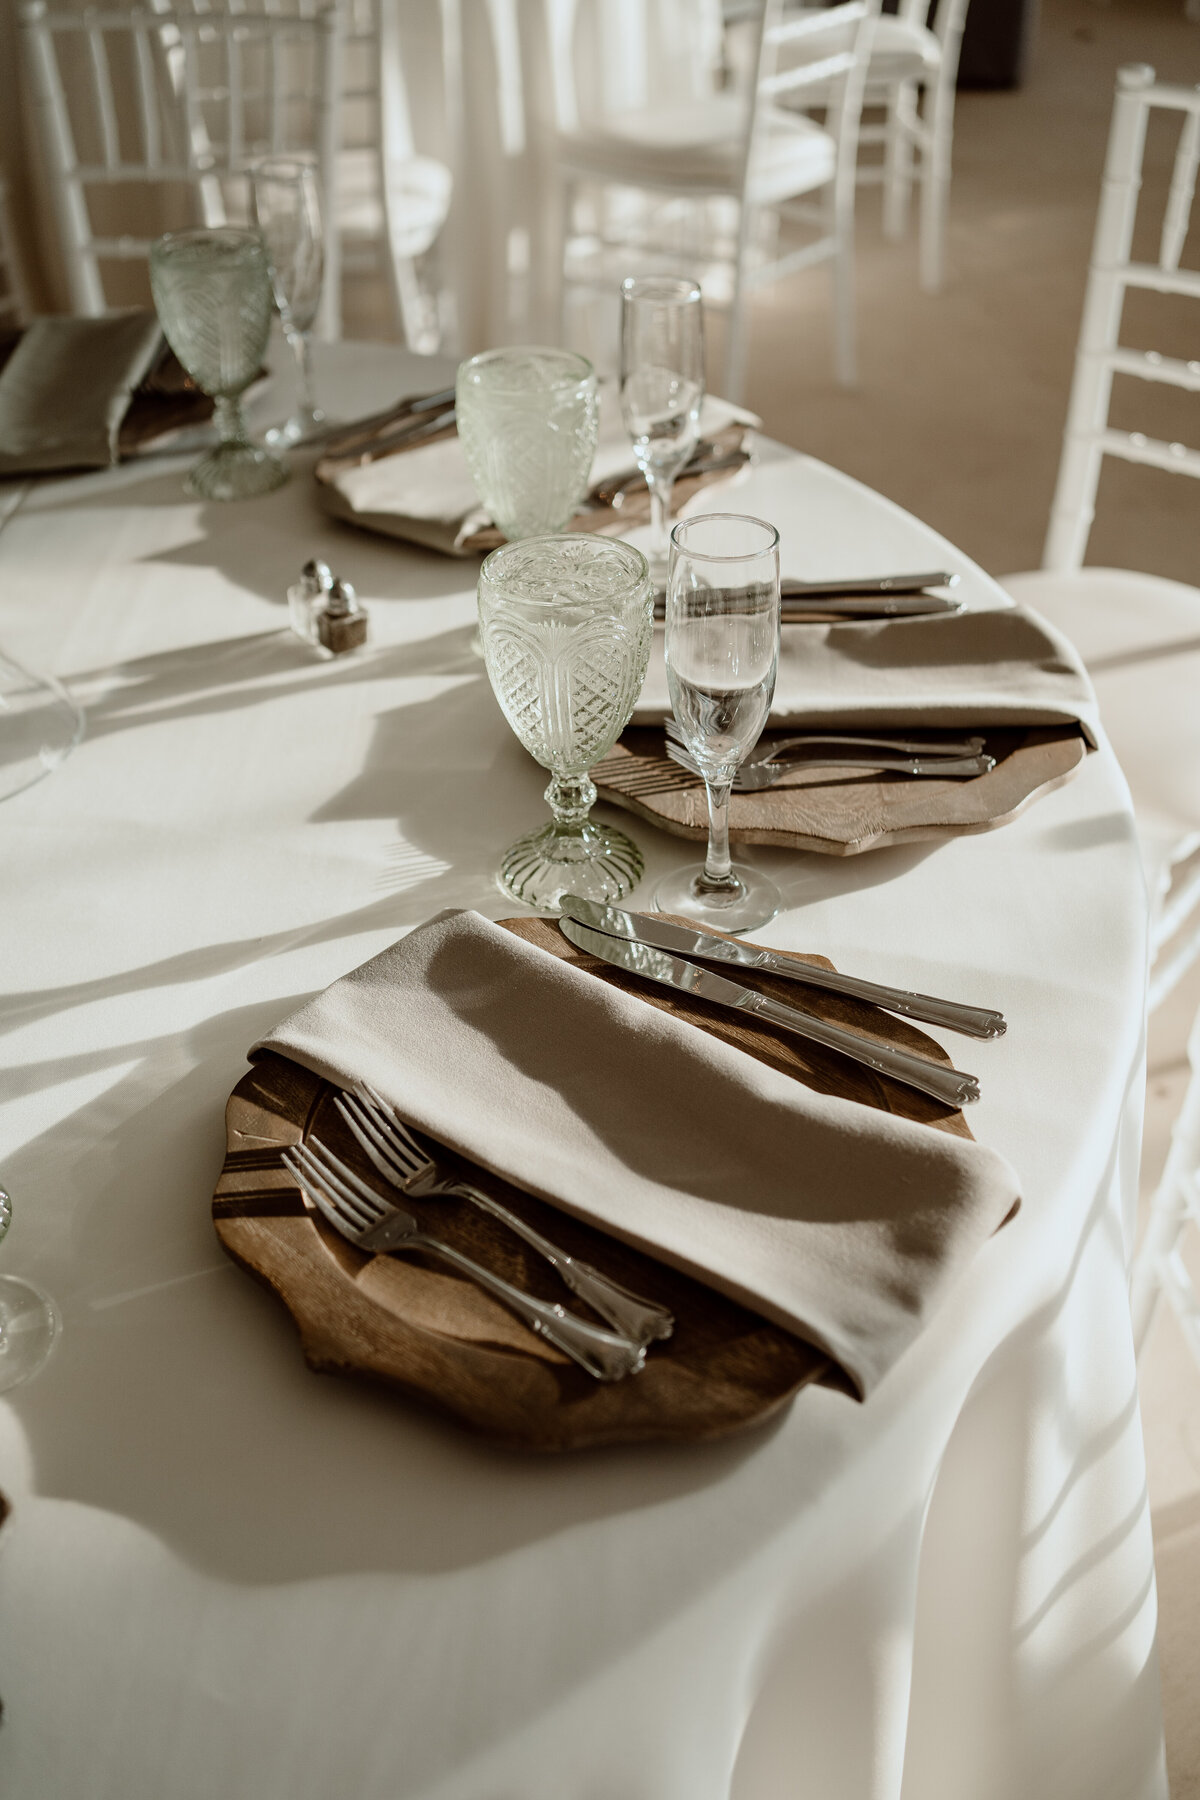 Close-up of an elegant wedding reception table setting, featuring wooden chargers, beige napkins, vintage glassware, and silver cutlery on a white tablecloth. The natural light creates a warm and inviting atmosphere.